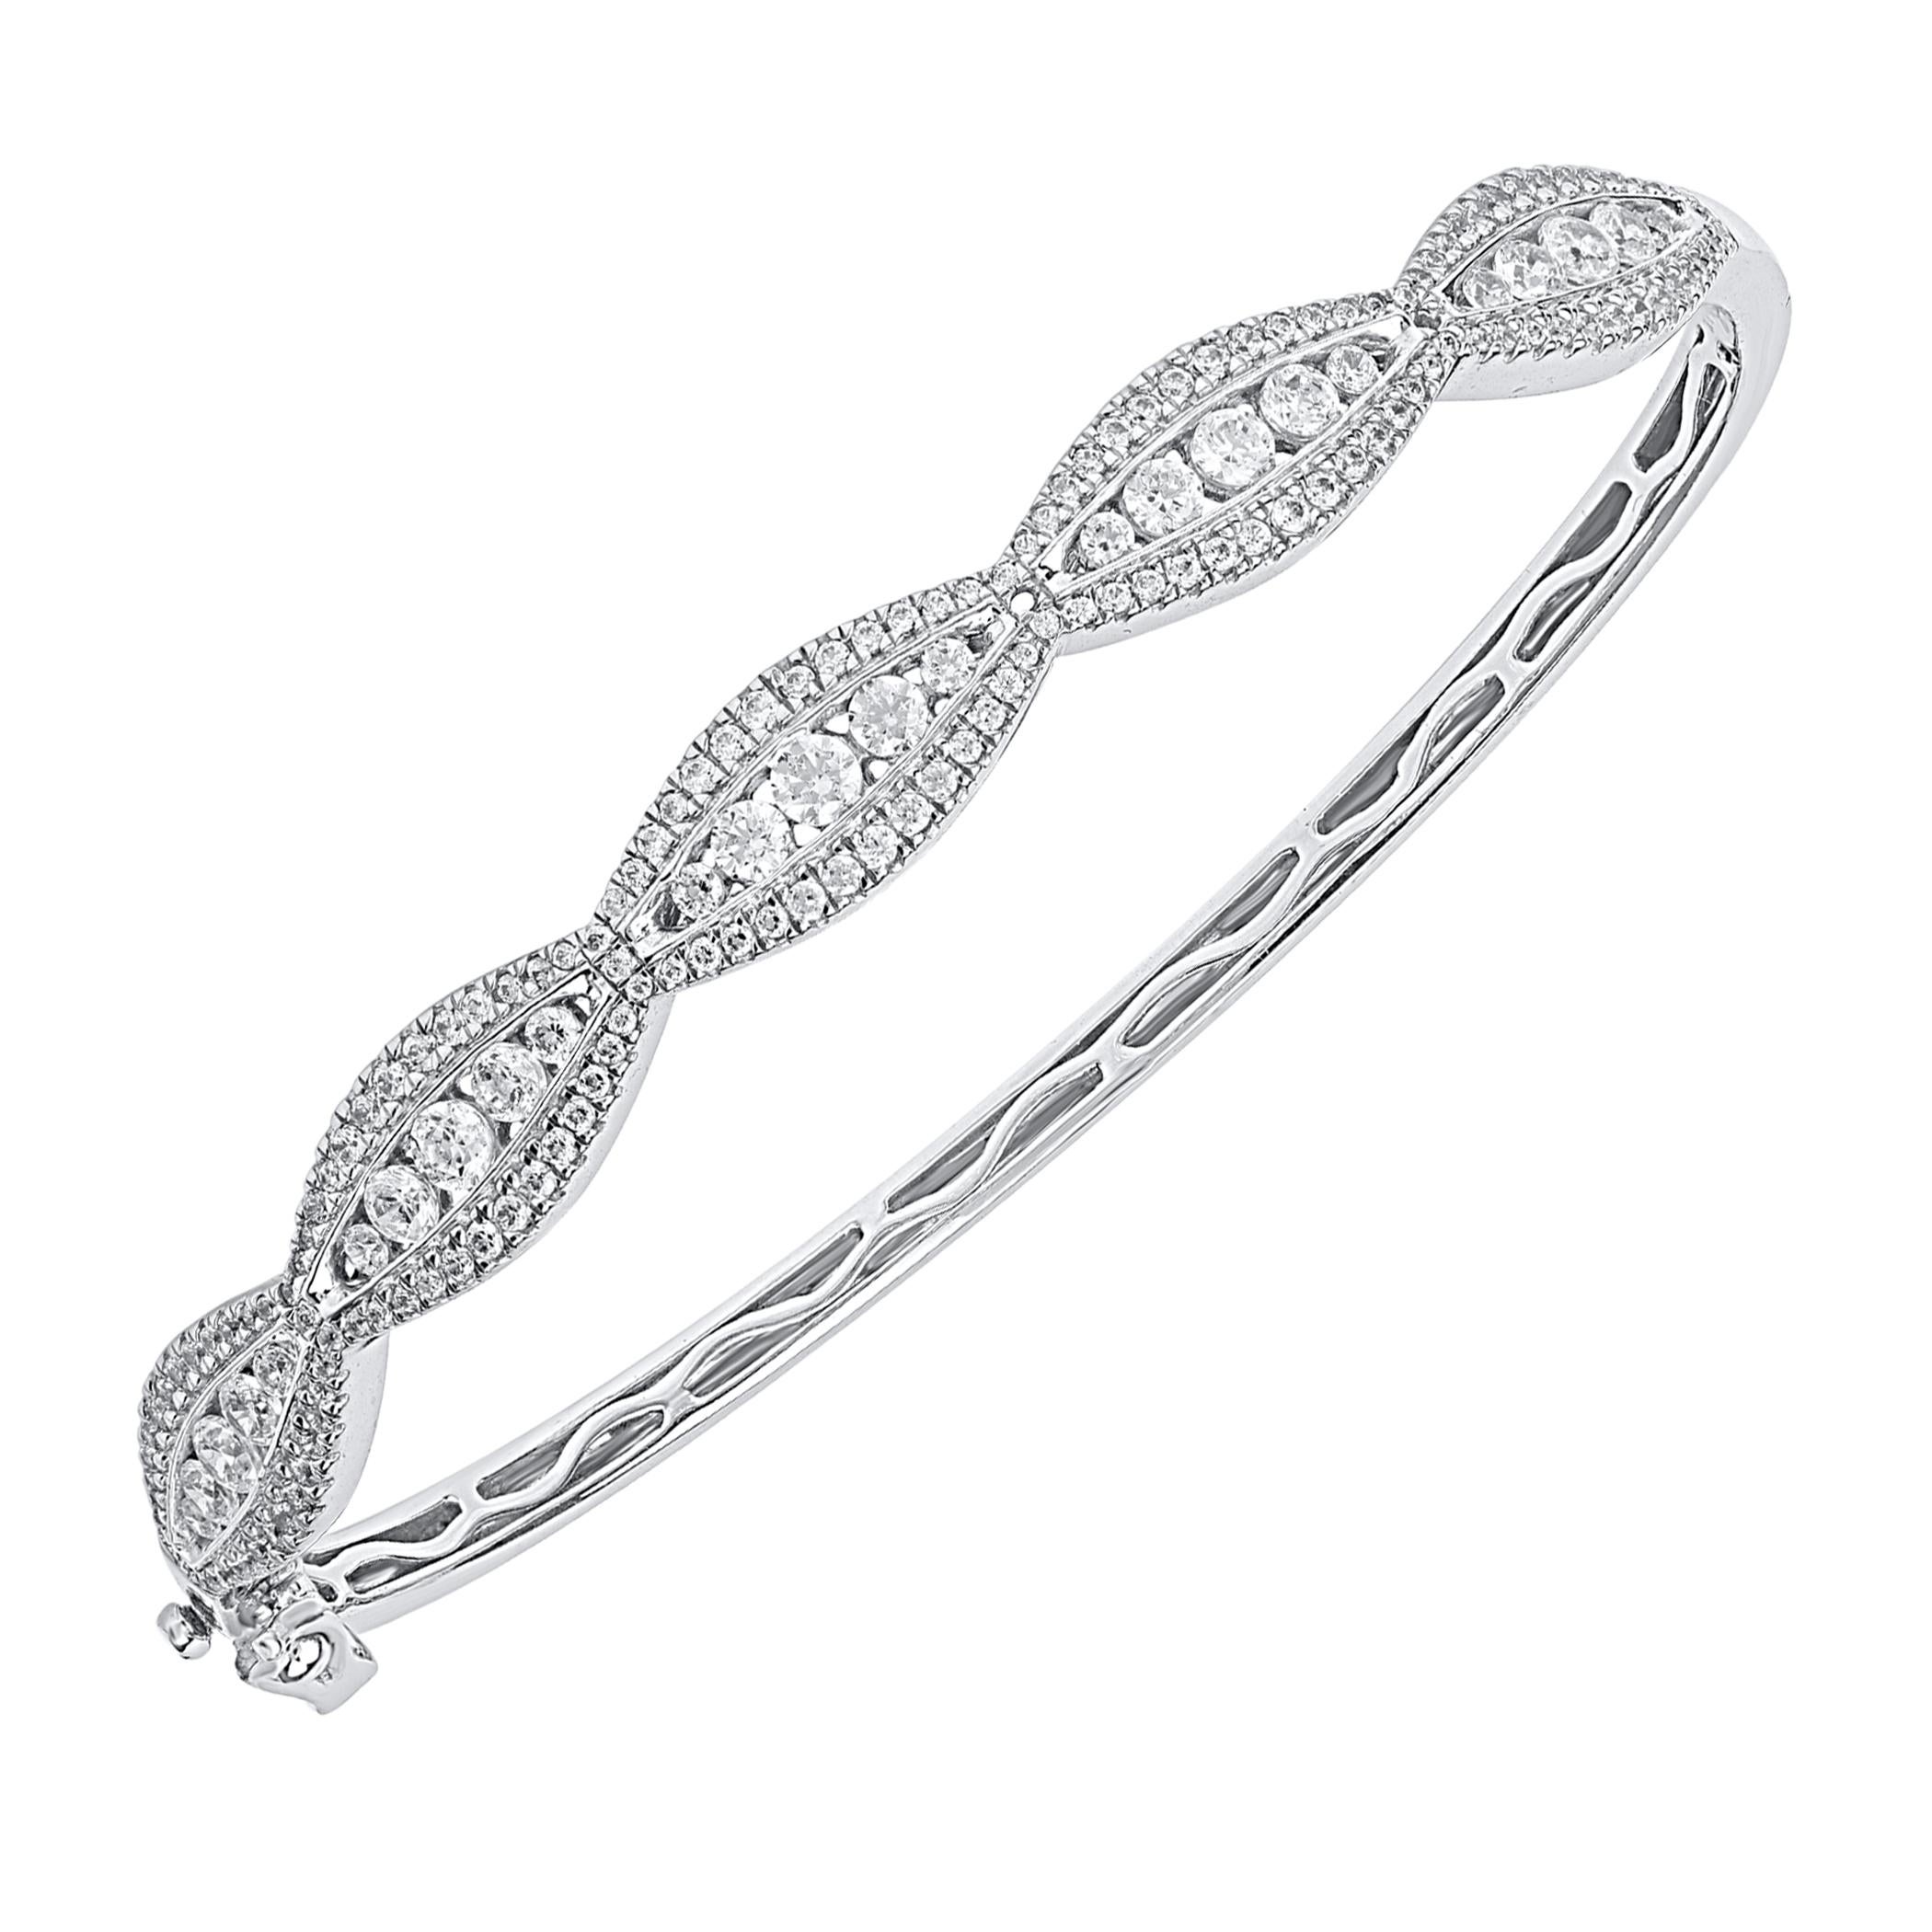 Simple and sparkling, this diamond bangle elevates any attire. Expertly handcrafted by our inhouse experts in 14 karat white gold and studded with 173 round brilliant and single cut natural diamond set in prong and channel setting. The total diamond